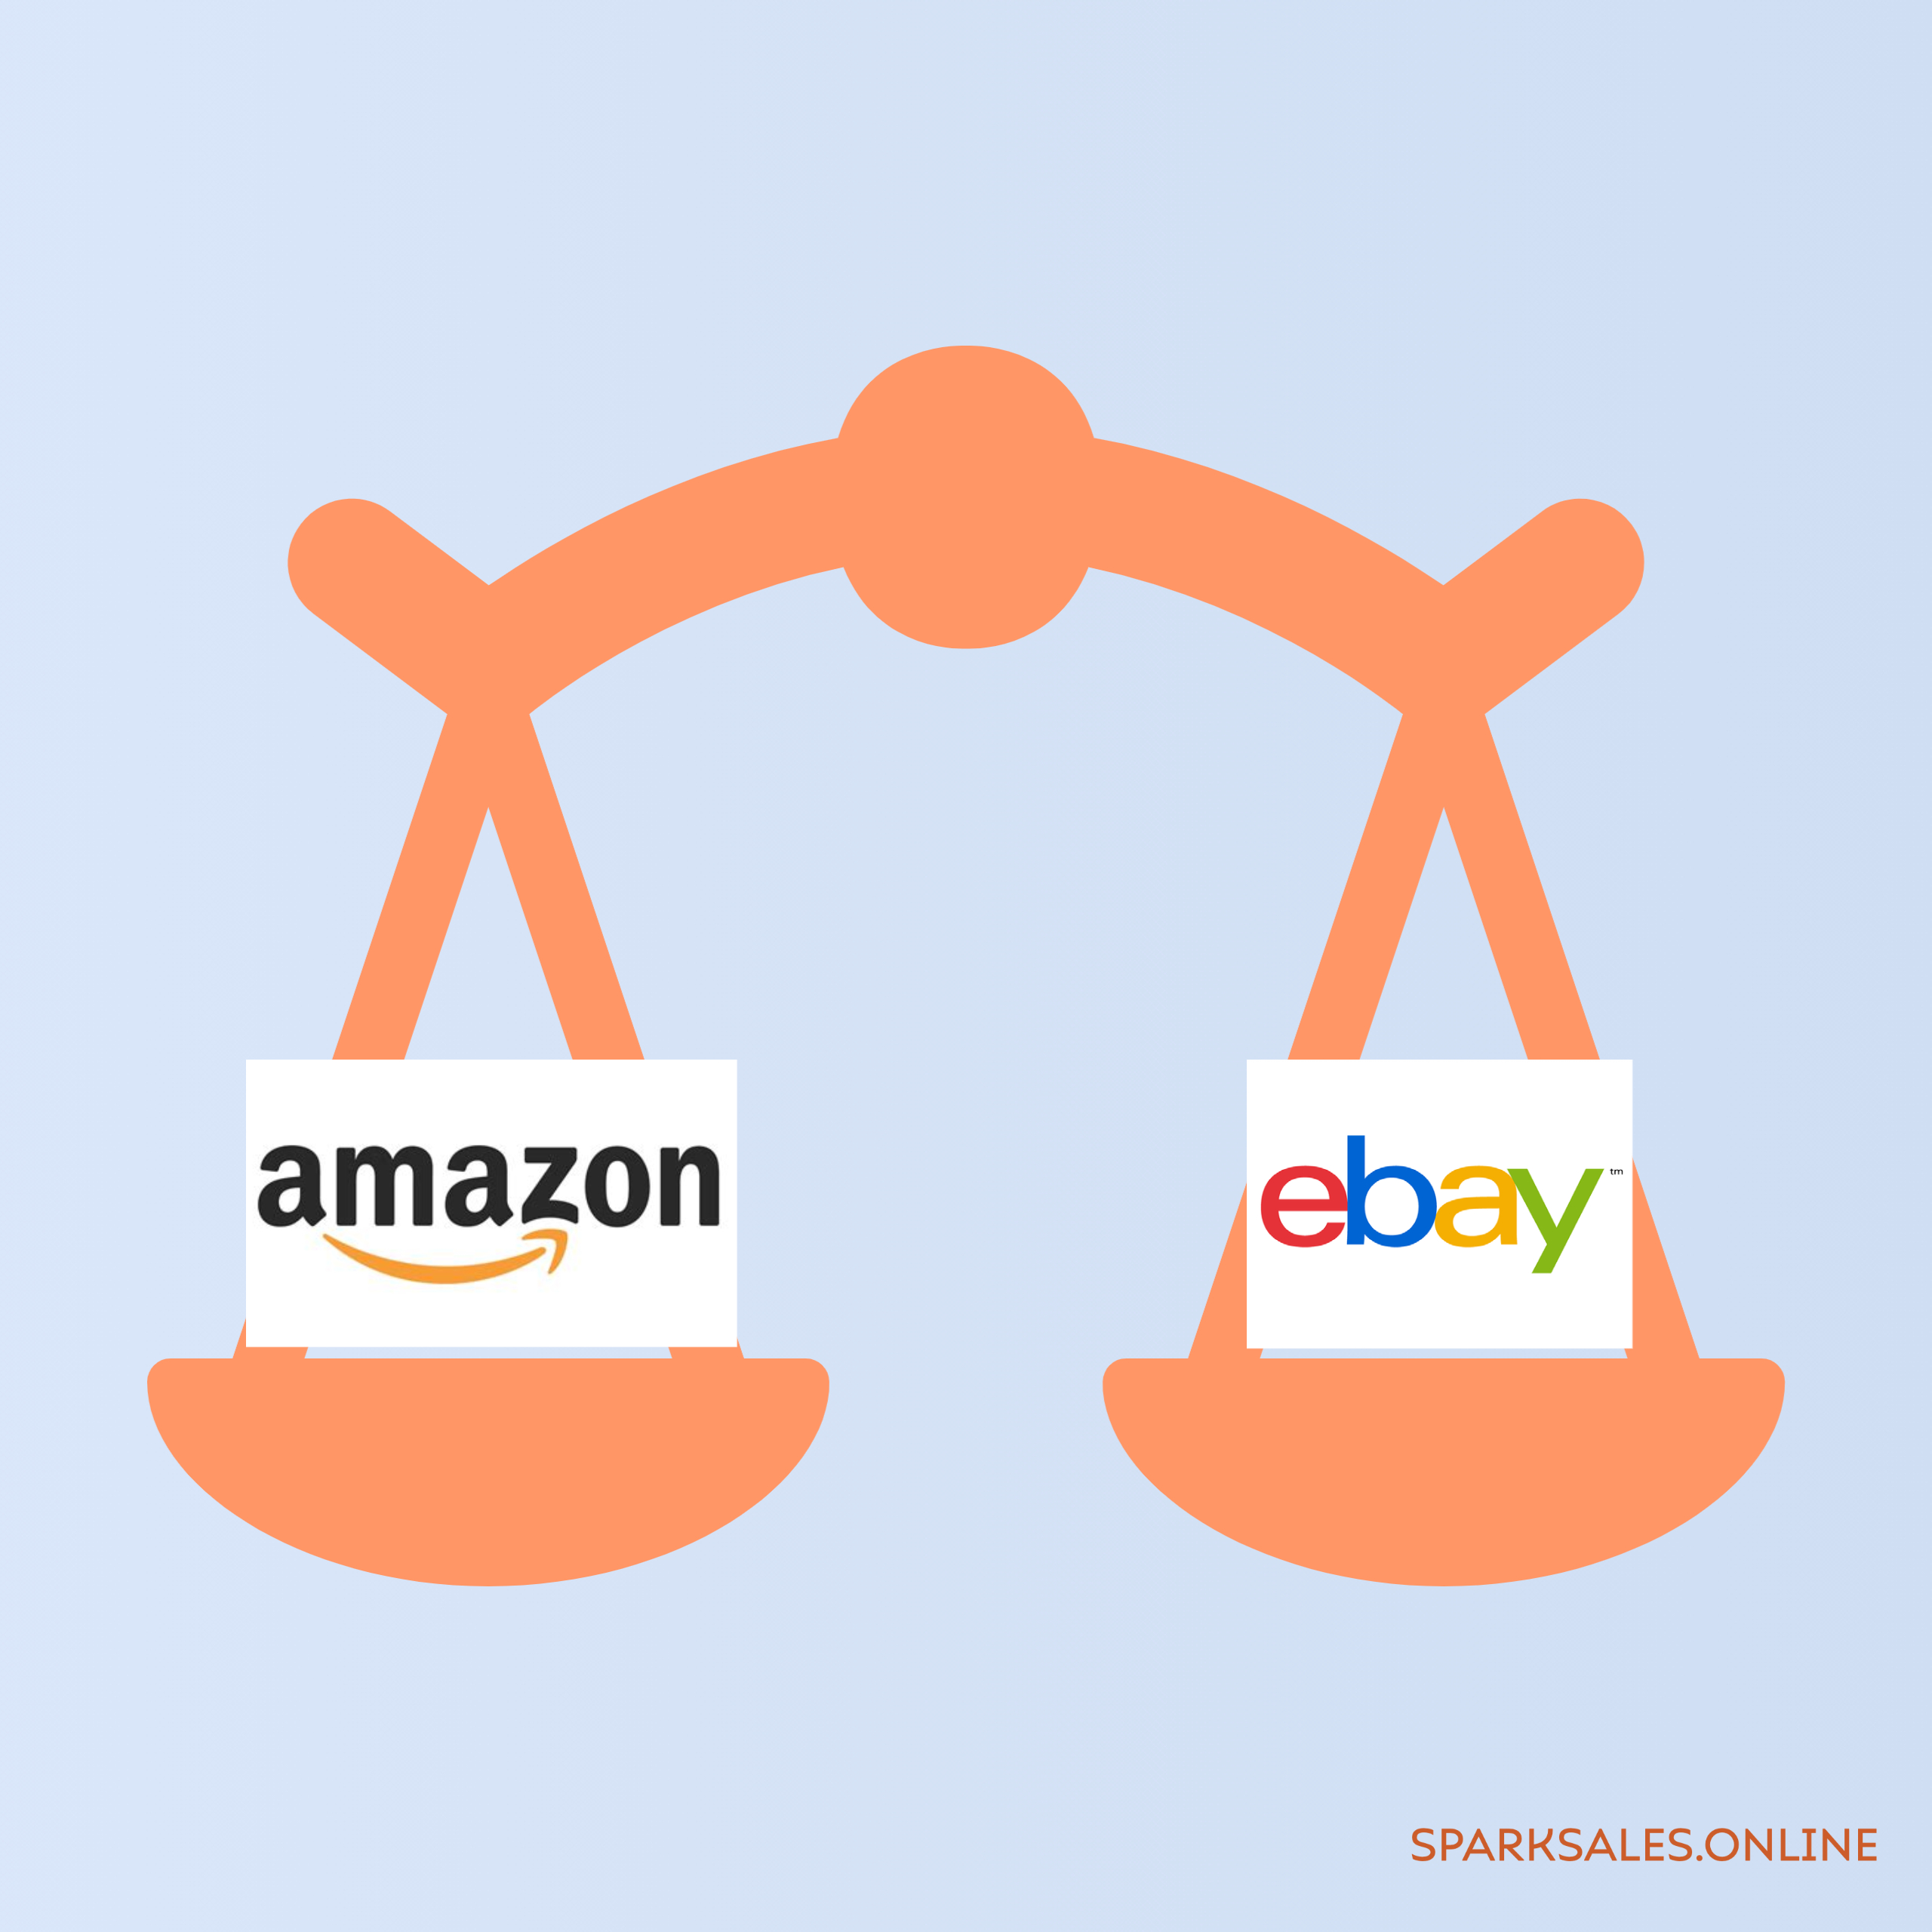 Is It Easier to Dropship on Ebay or Amazon?